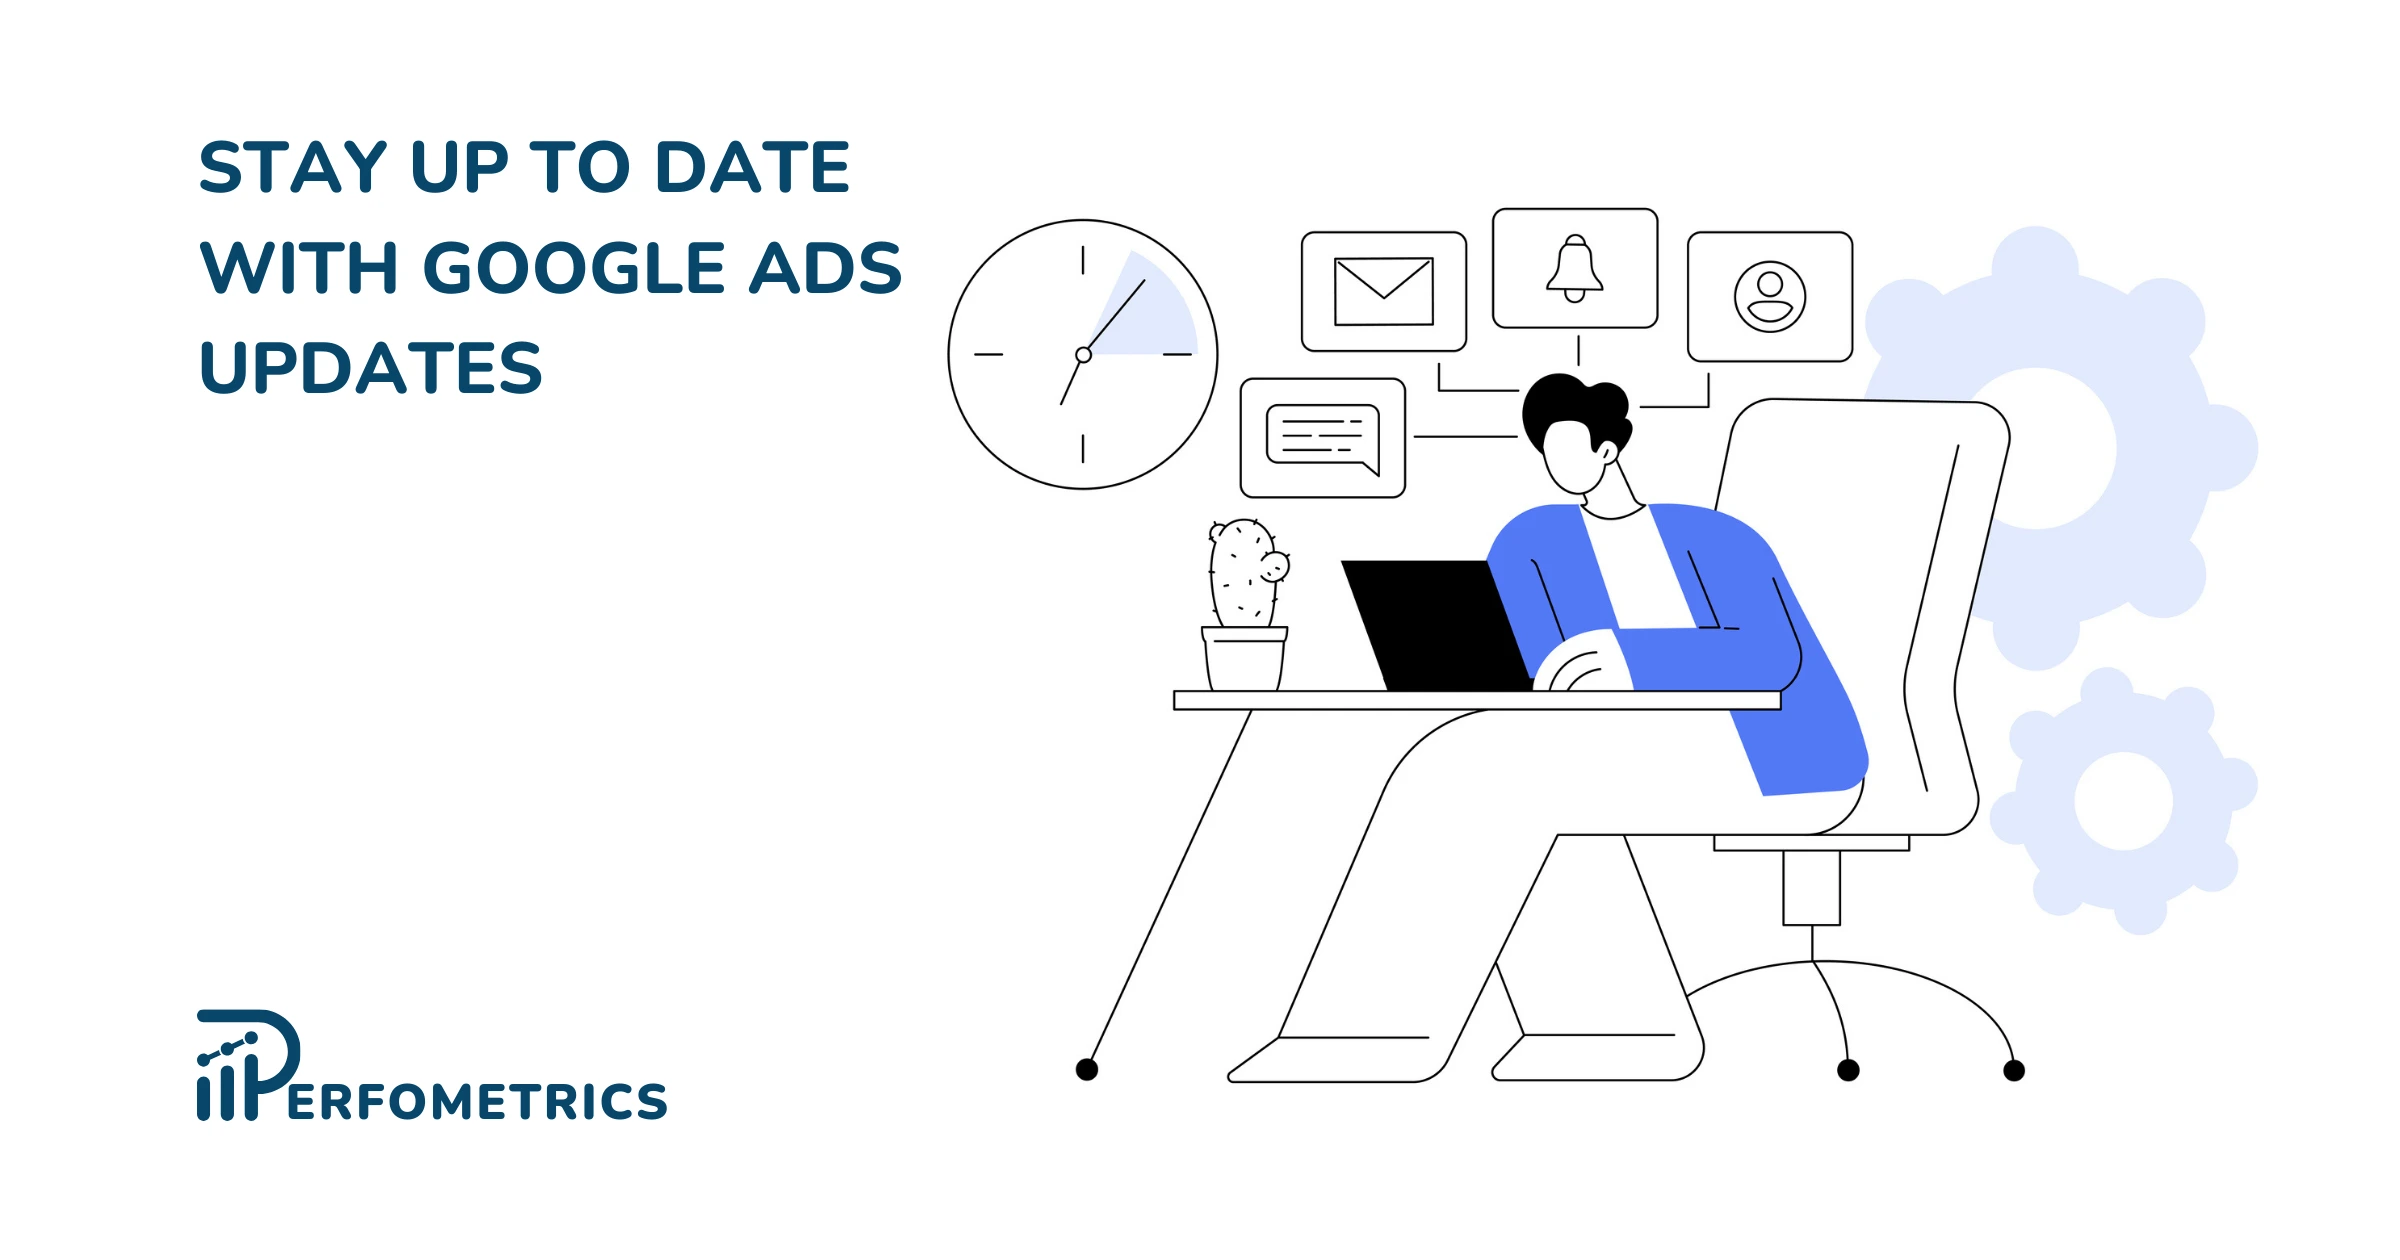 Stay Up To Date with Google Ads Updates